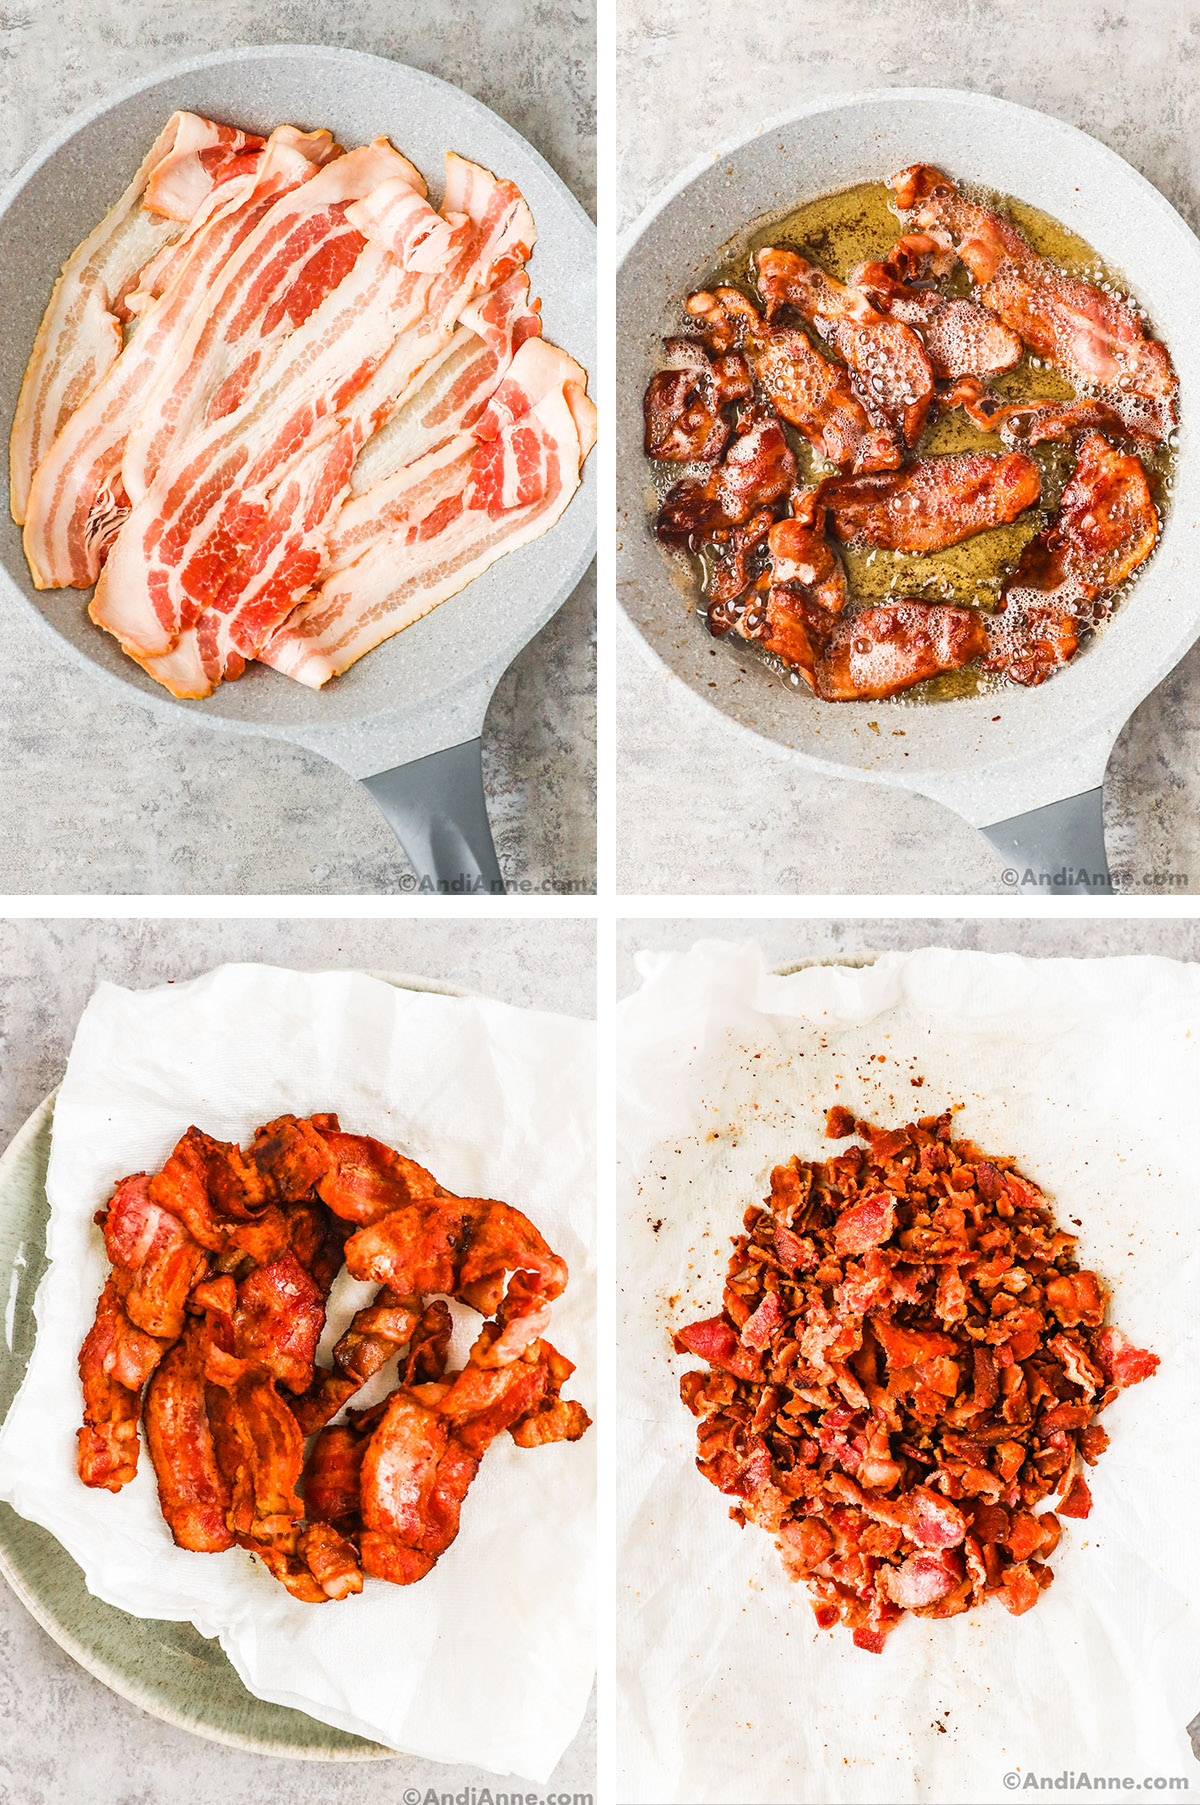 Four images of bacon in various cooking stages. First is raw bacon strips in a frying pan. Second is cooked bacon strips. Third is cooked bacon strips on paper twoel. Fourth is crumbled bacon strips.